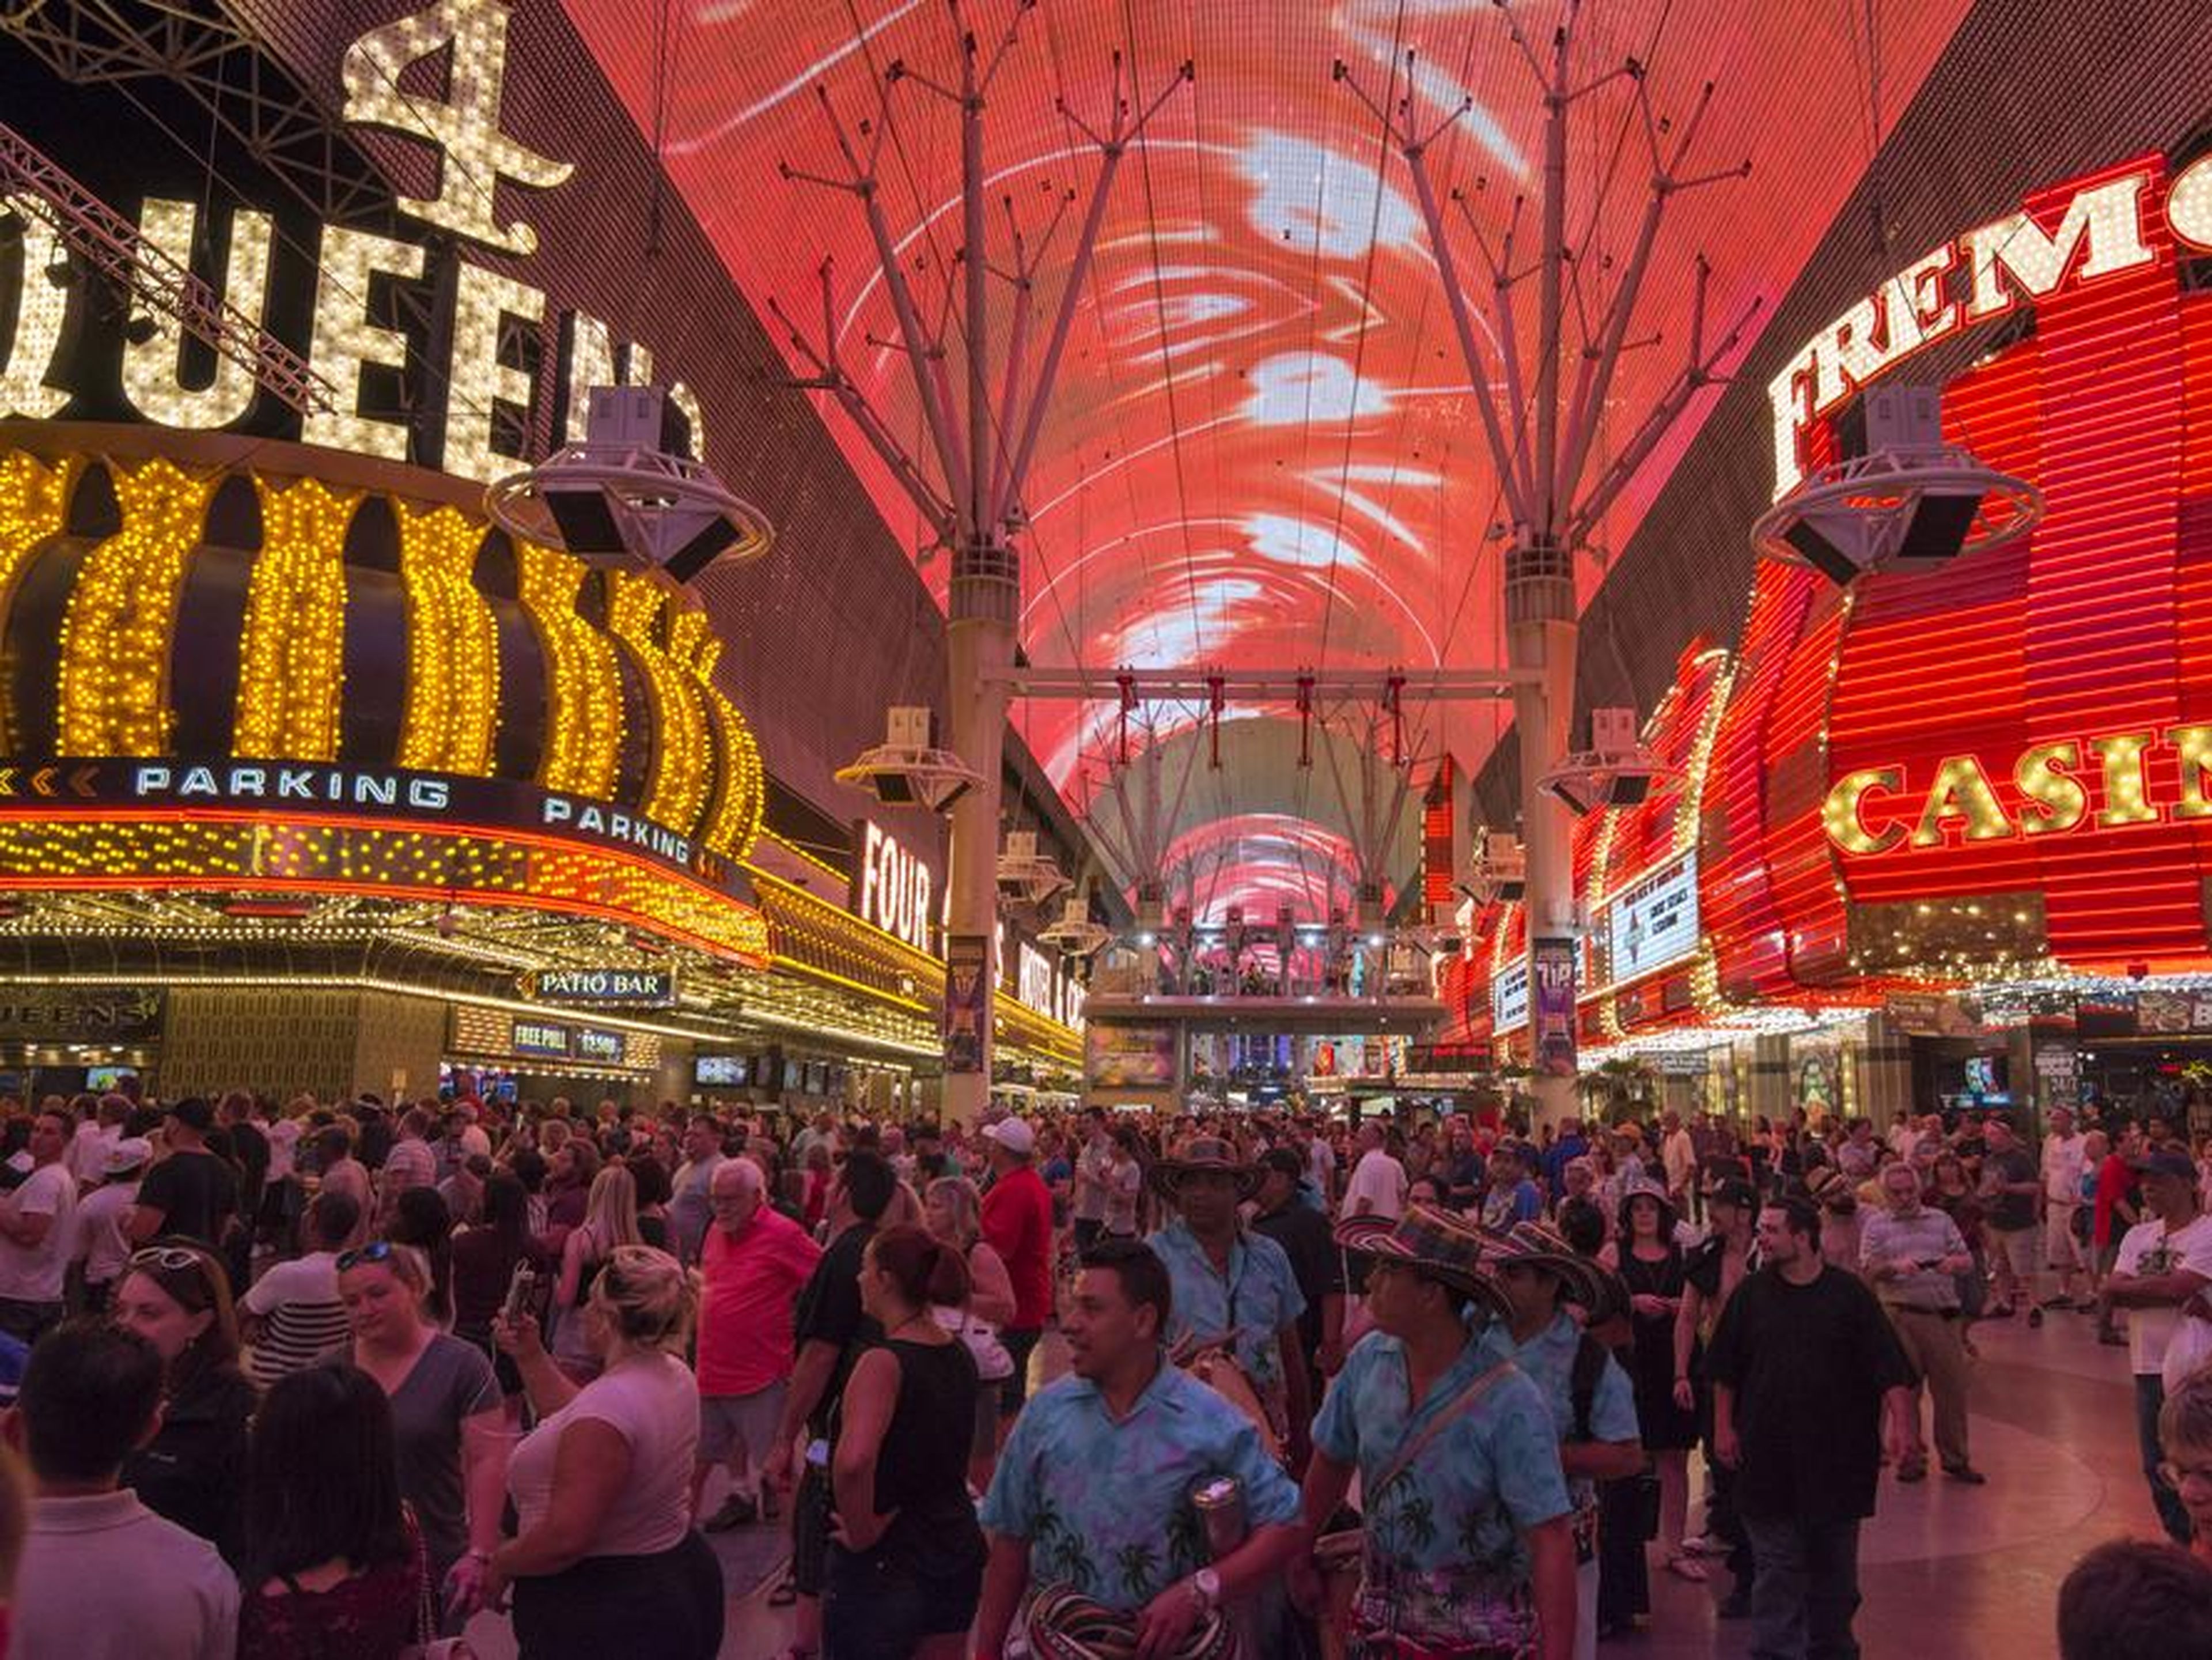 Las Vegas was voted the most overrated city in the world in a 2015 survey by Yahoo Travel. It could be because of the overpriced cocktails, the $5.99 ATM fees, or perhaps simply because of the lack of real culture.